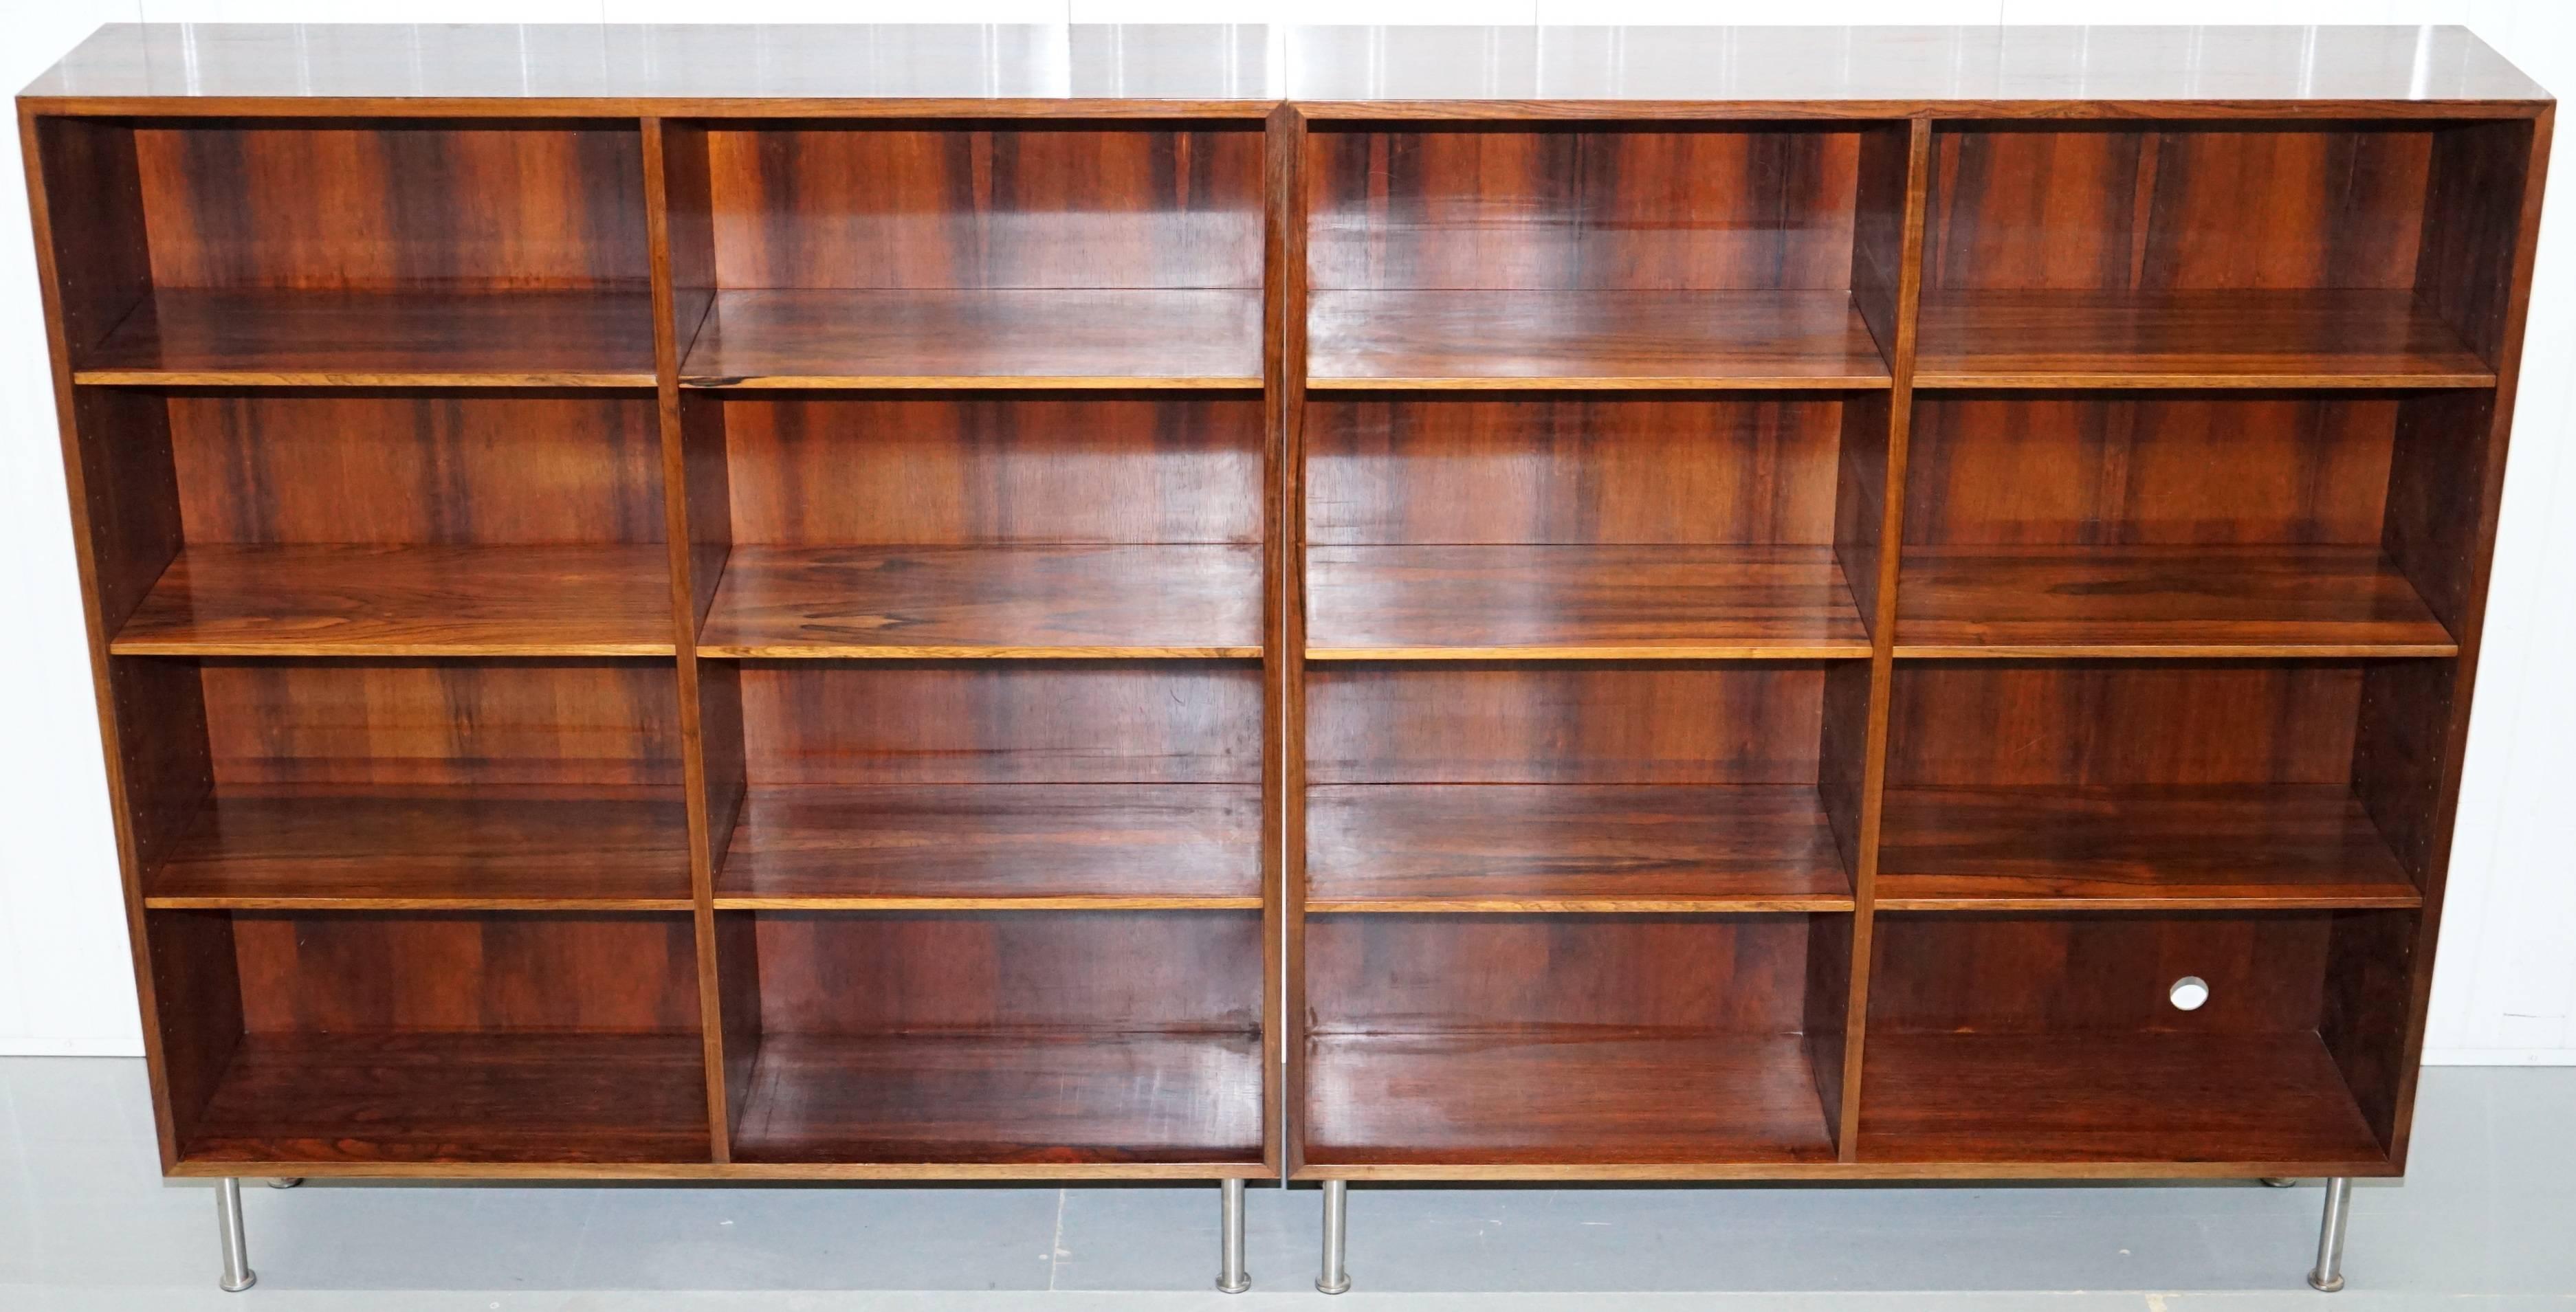 We are delighted to offer for sale this lovely pair of fully stamped Omann Jun Møbelfabrik Brazilian wood open bookcases

A good looking and expertly made pair using the finest Brazilian wood veneers available in the 1960s

The shelves are all